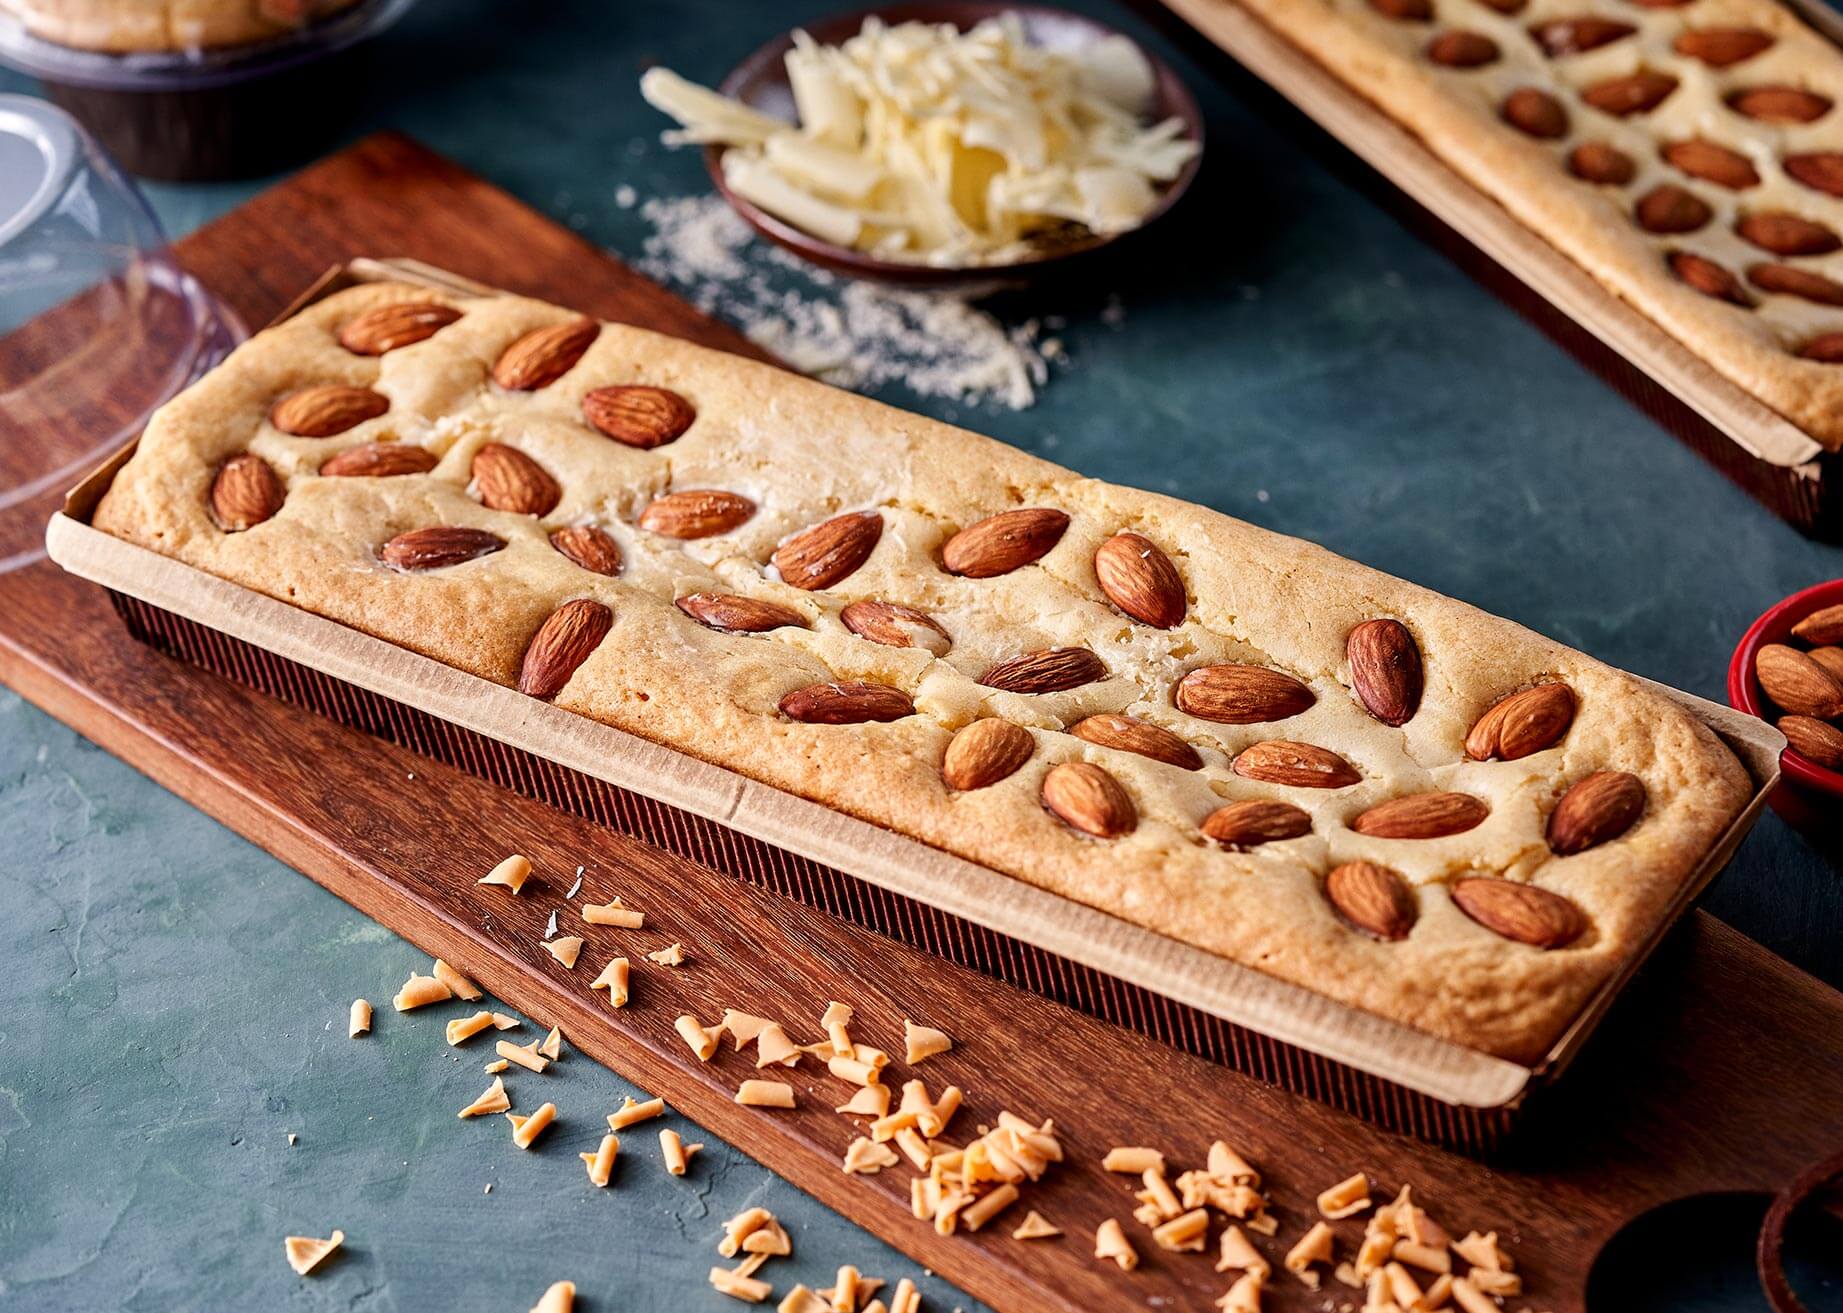 Almond and pecan plum cake in Novacart PM baking mold